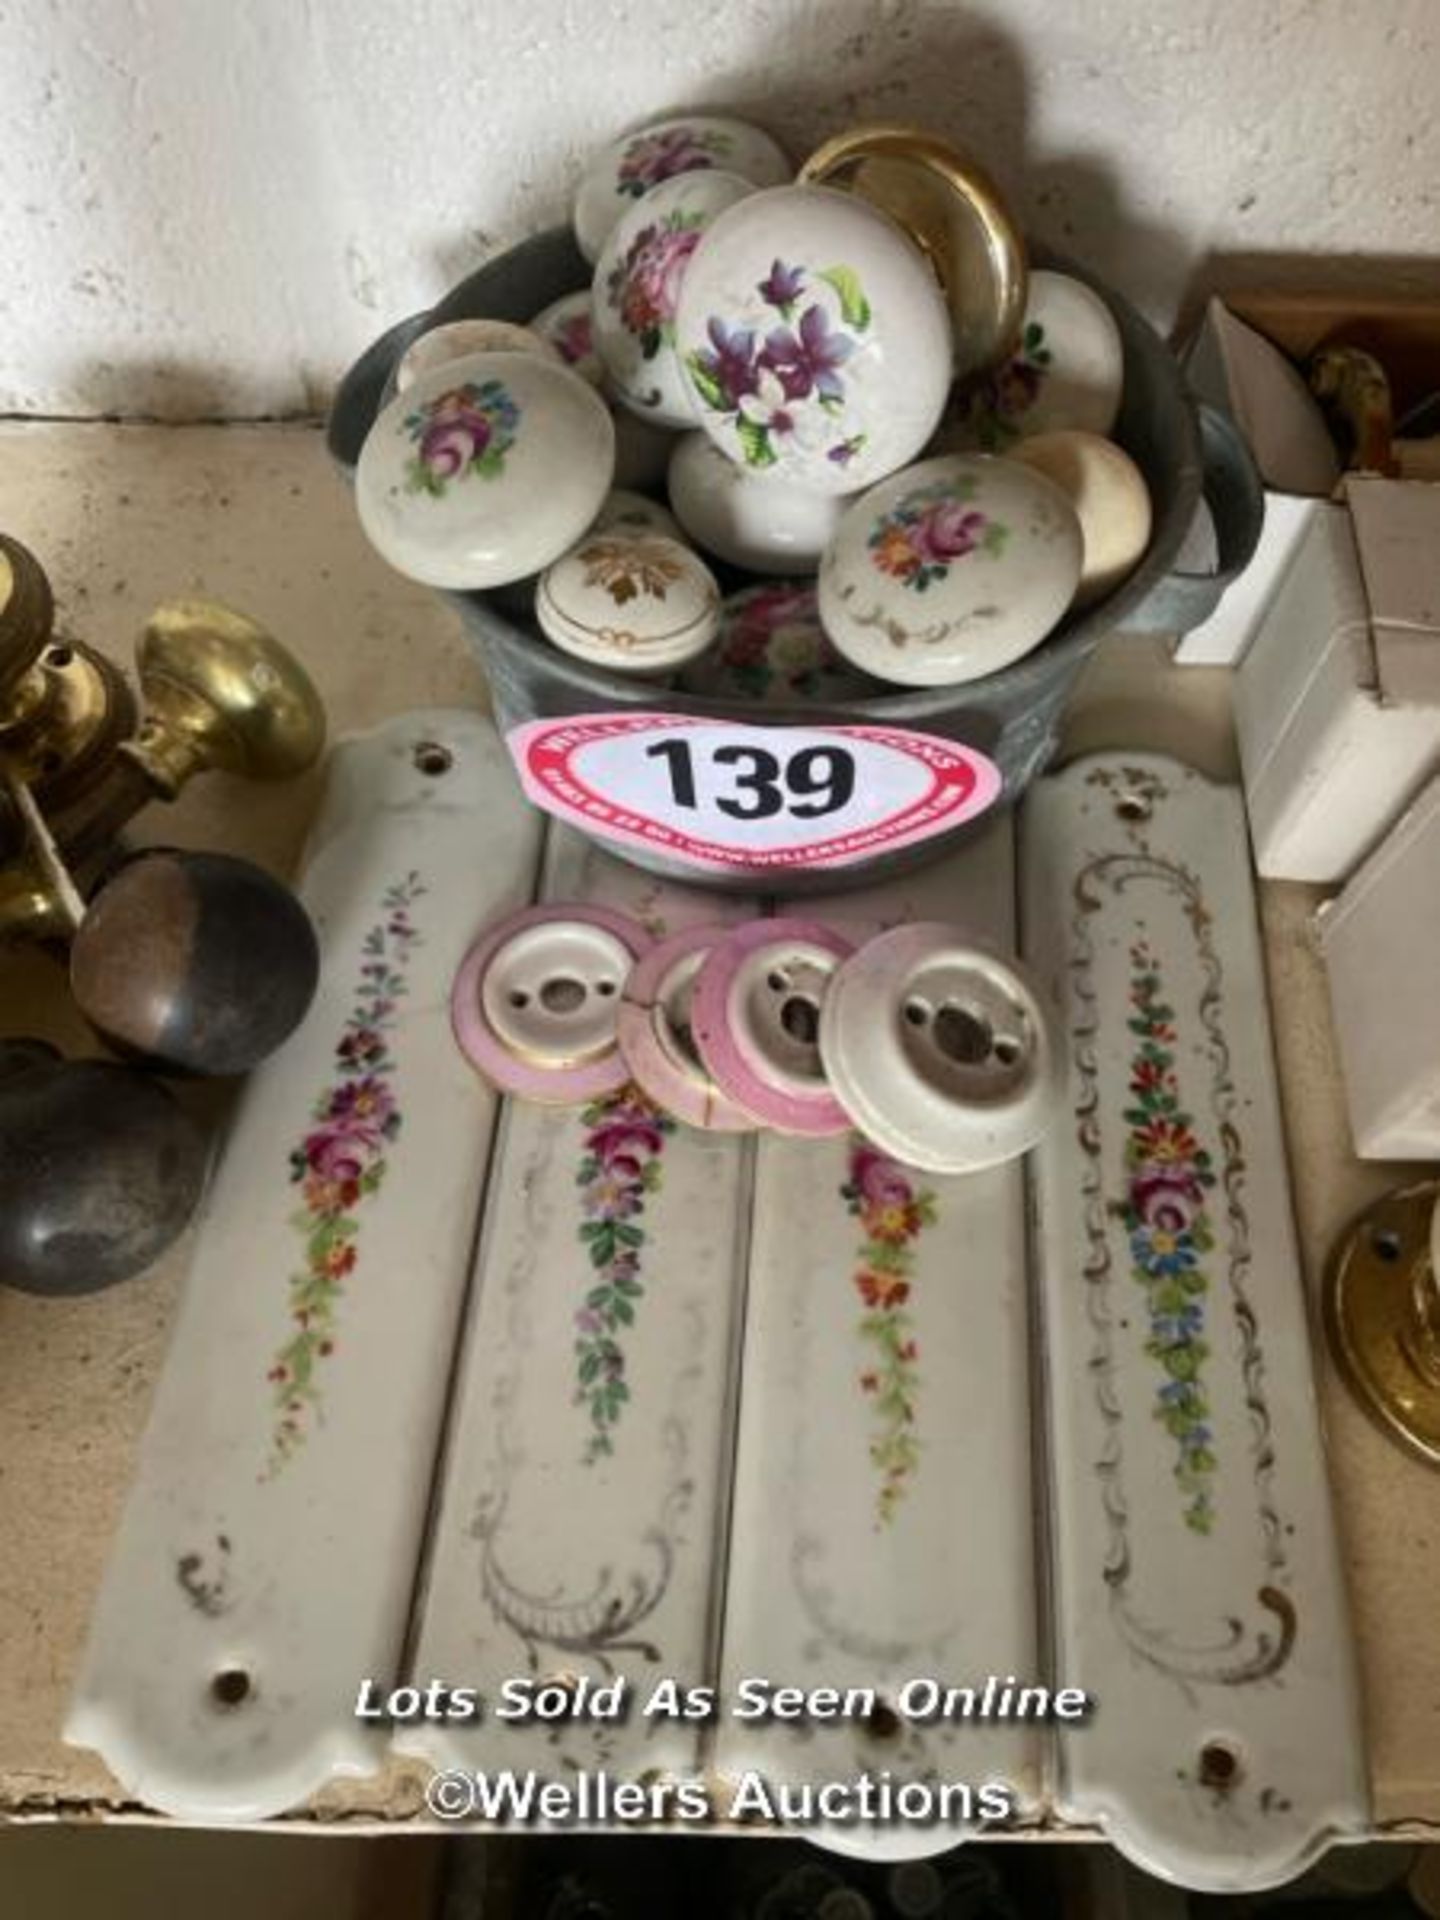 QUANTITY OF ASSORTED DOOR HANDLES, MOSTLY PORCELAIN WITH FLORAL DESIGN AND SOME BRASS - Image 3 of 4